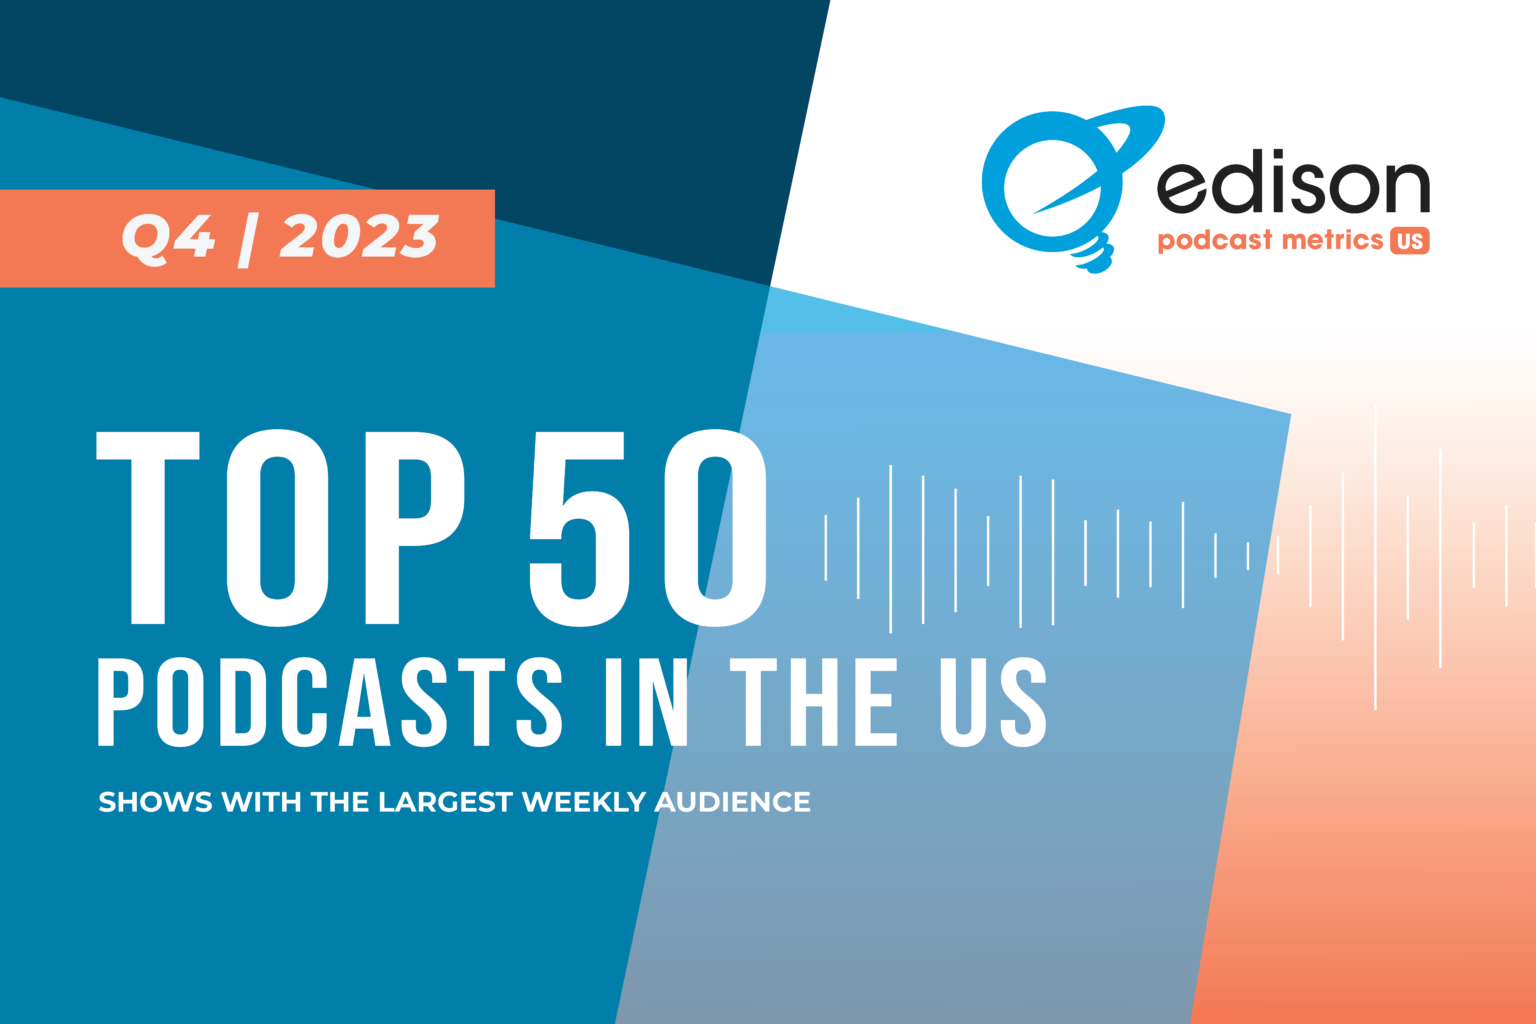 The Top 50 U.S. Podcasts Q4 2023 Edison Research